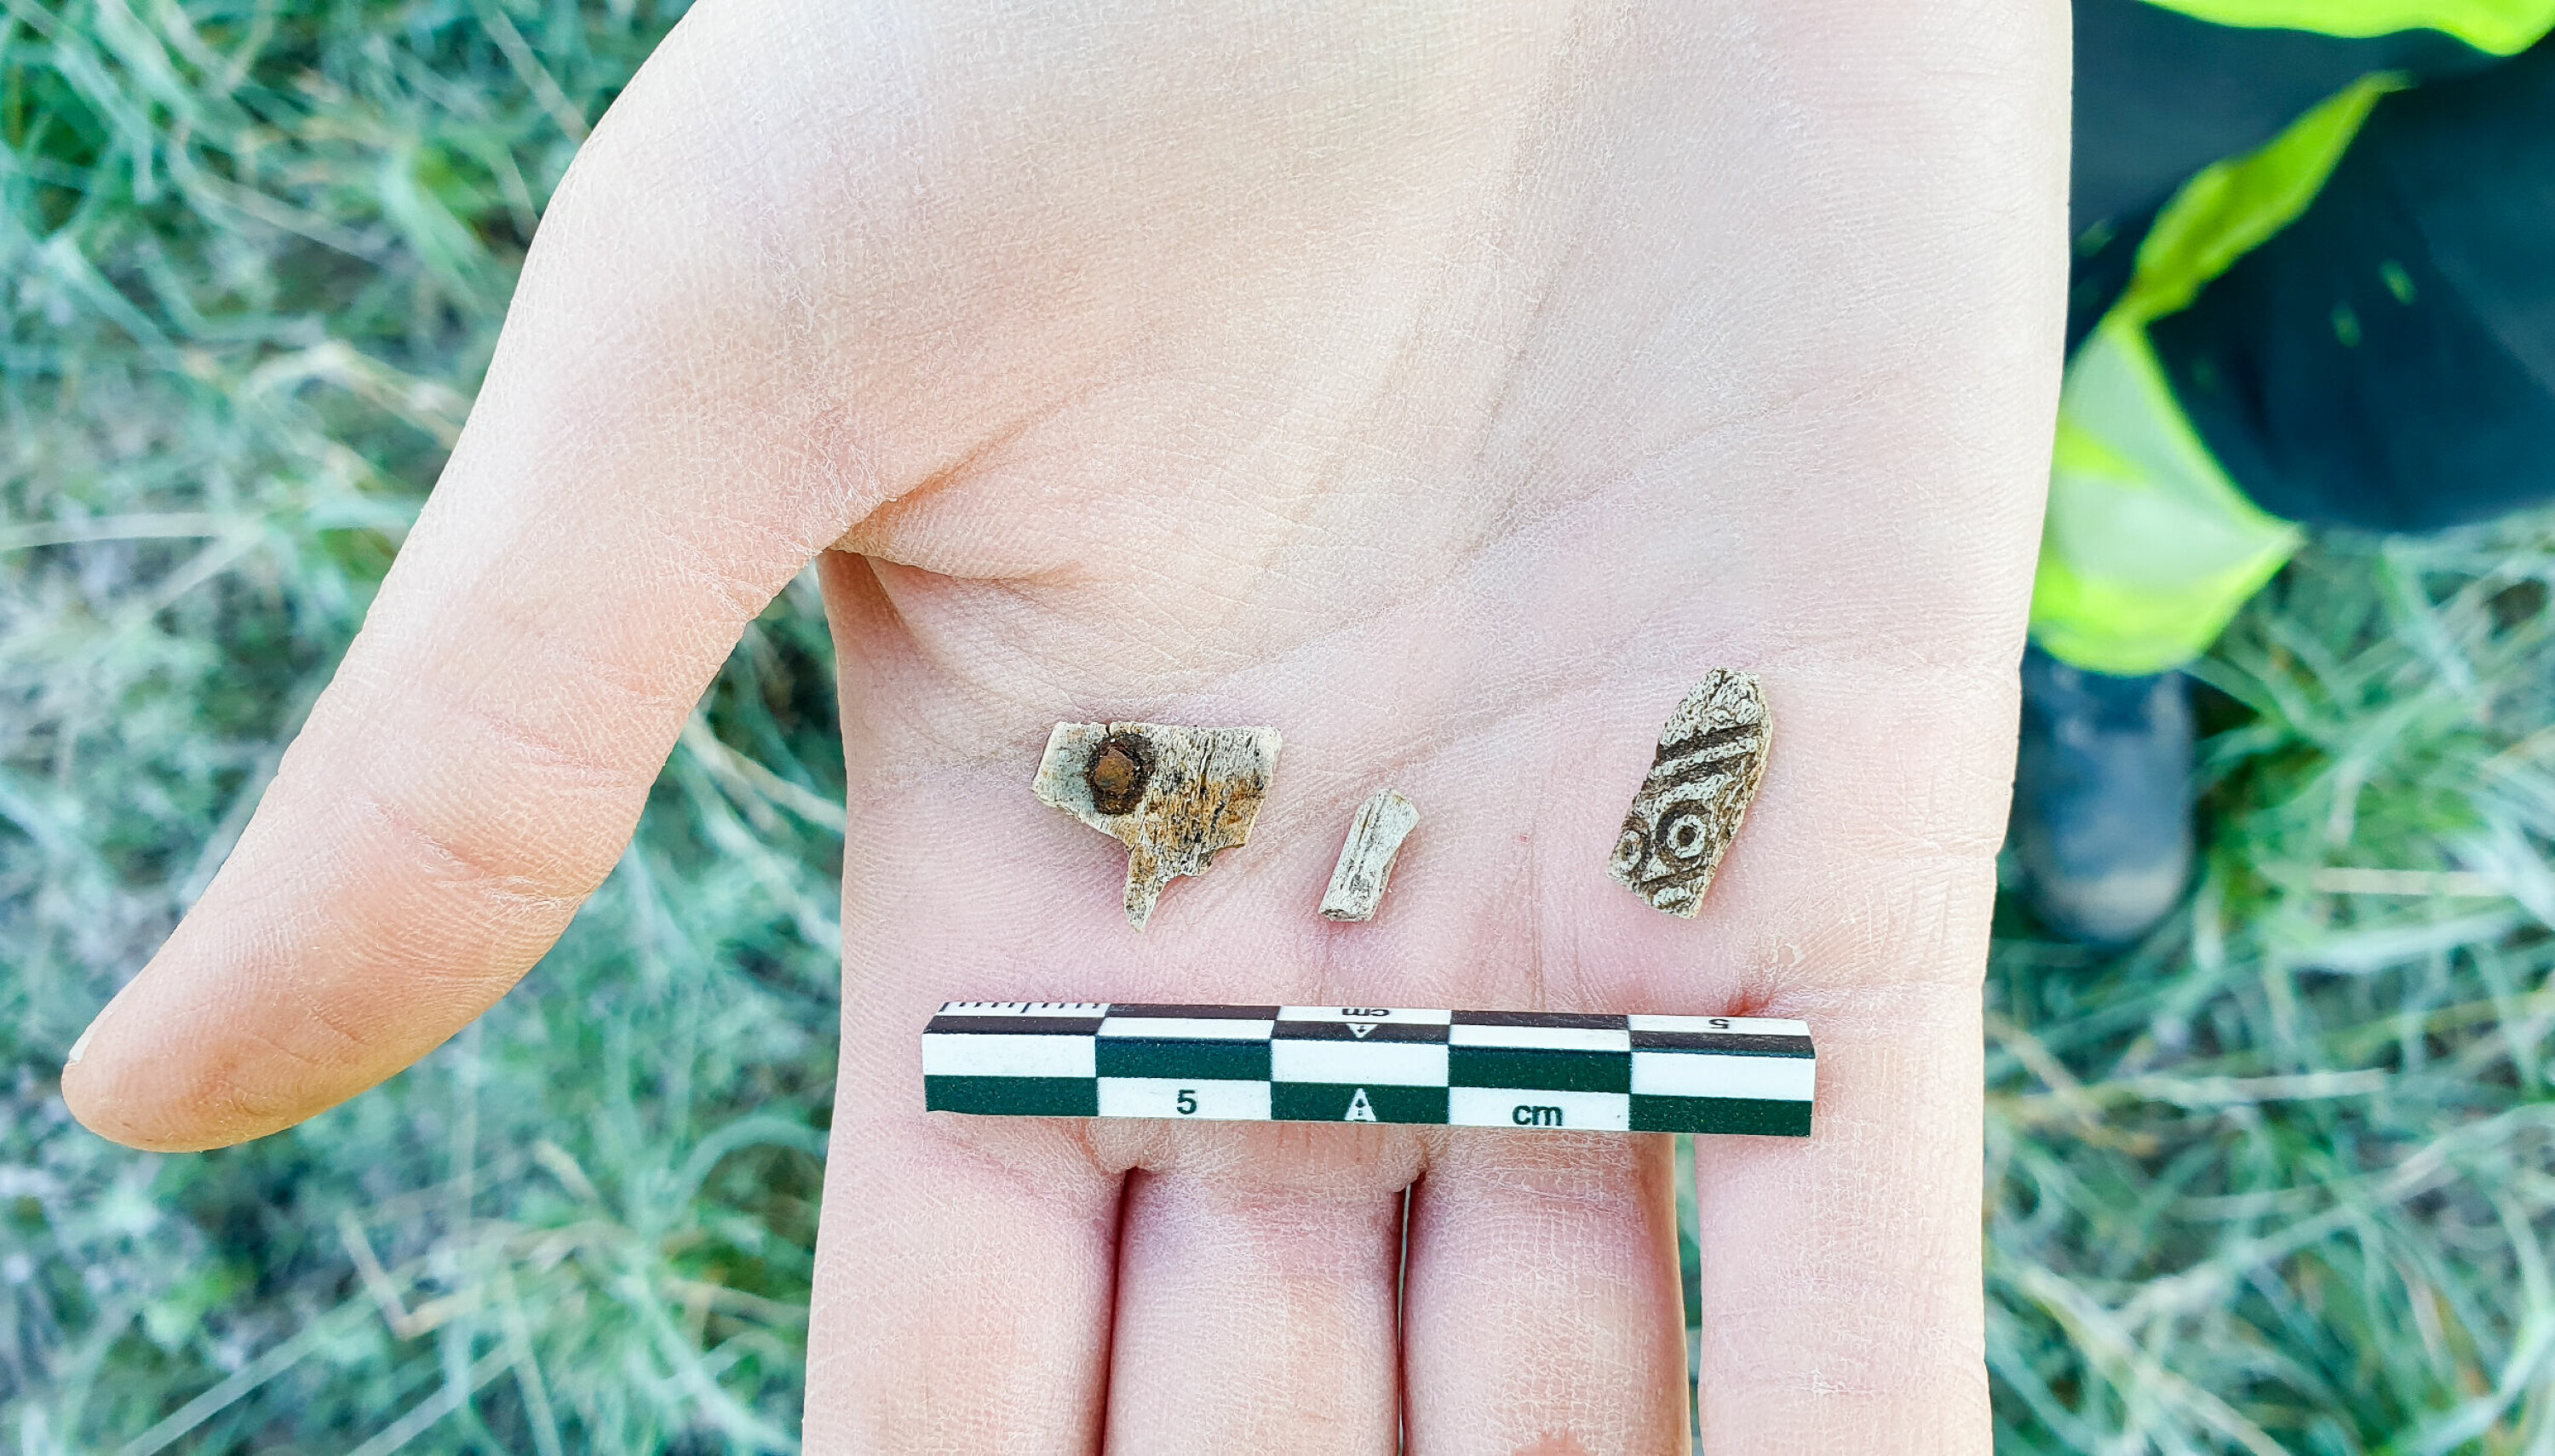 Pieces of a comb found near the burnt human bones.